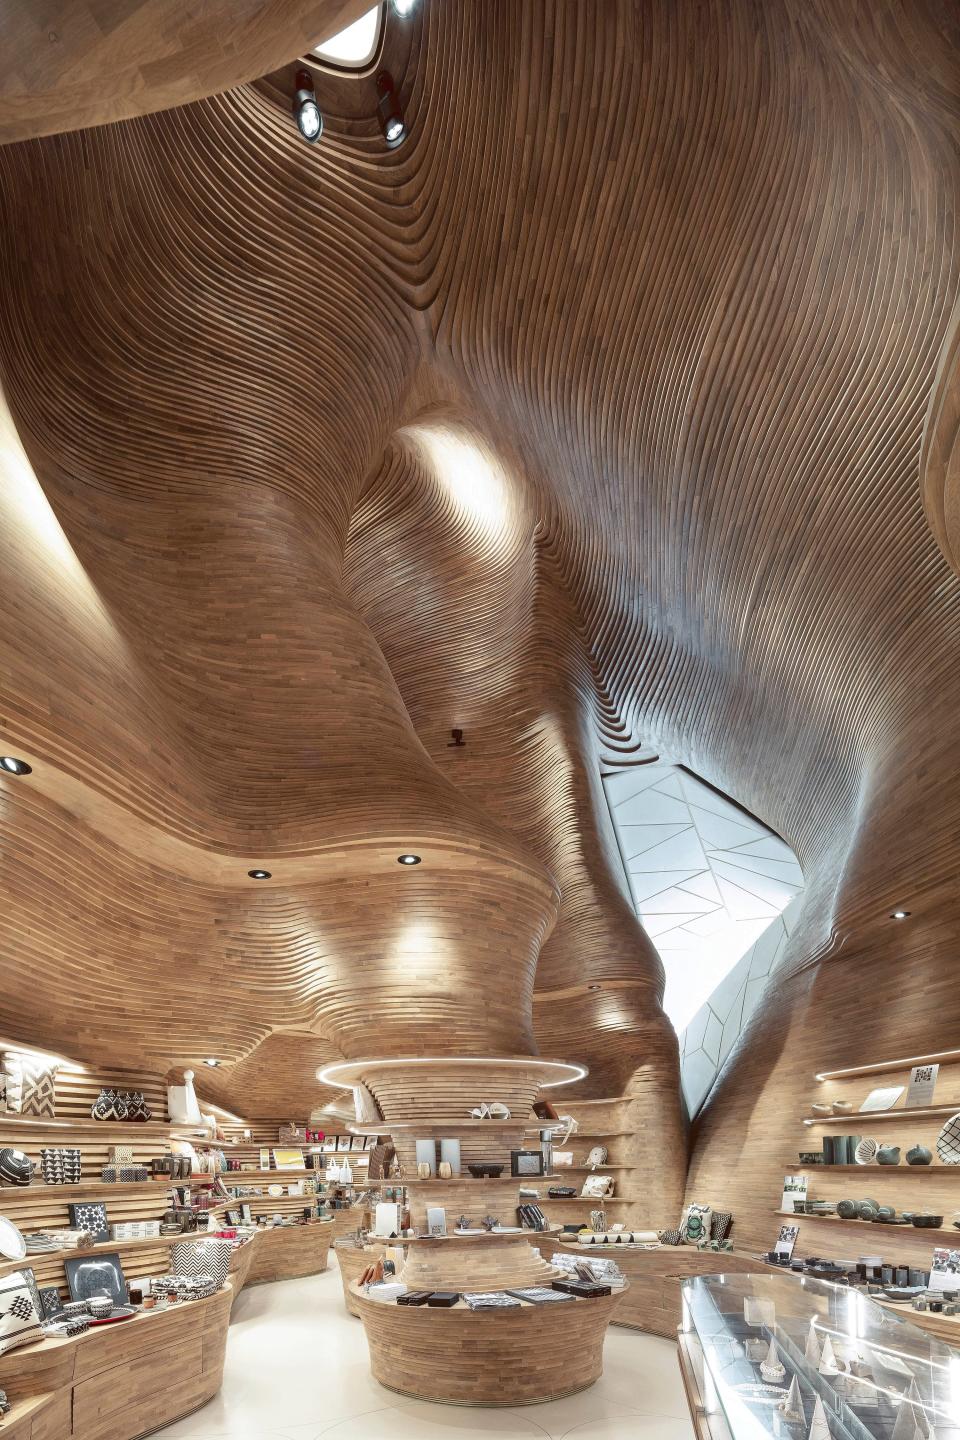 The interior of the National Museum of Qatar gift shop, designed by Koichi Takada Architects.